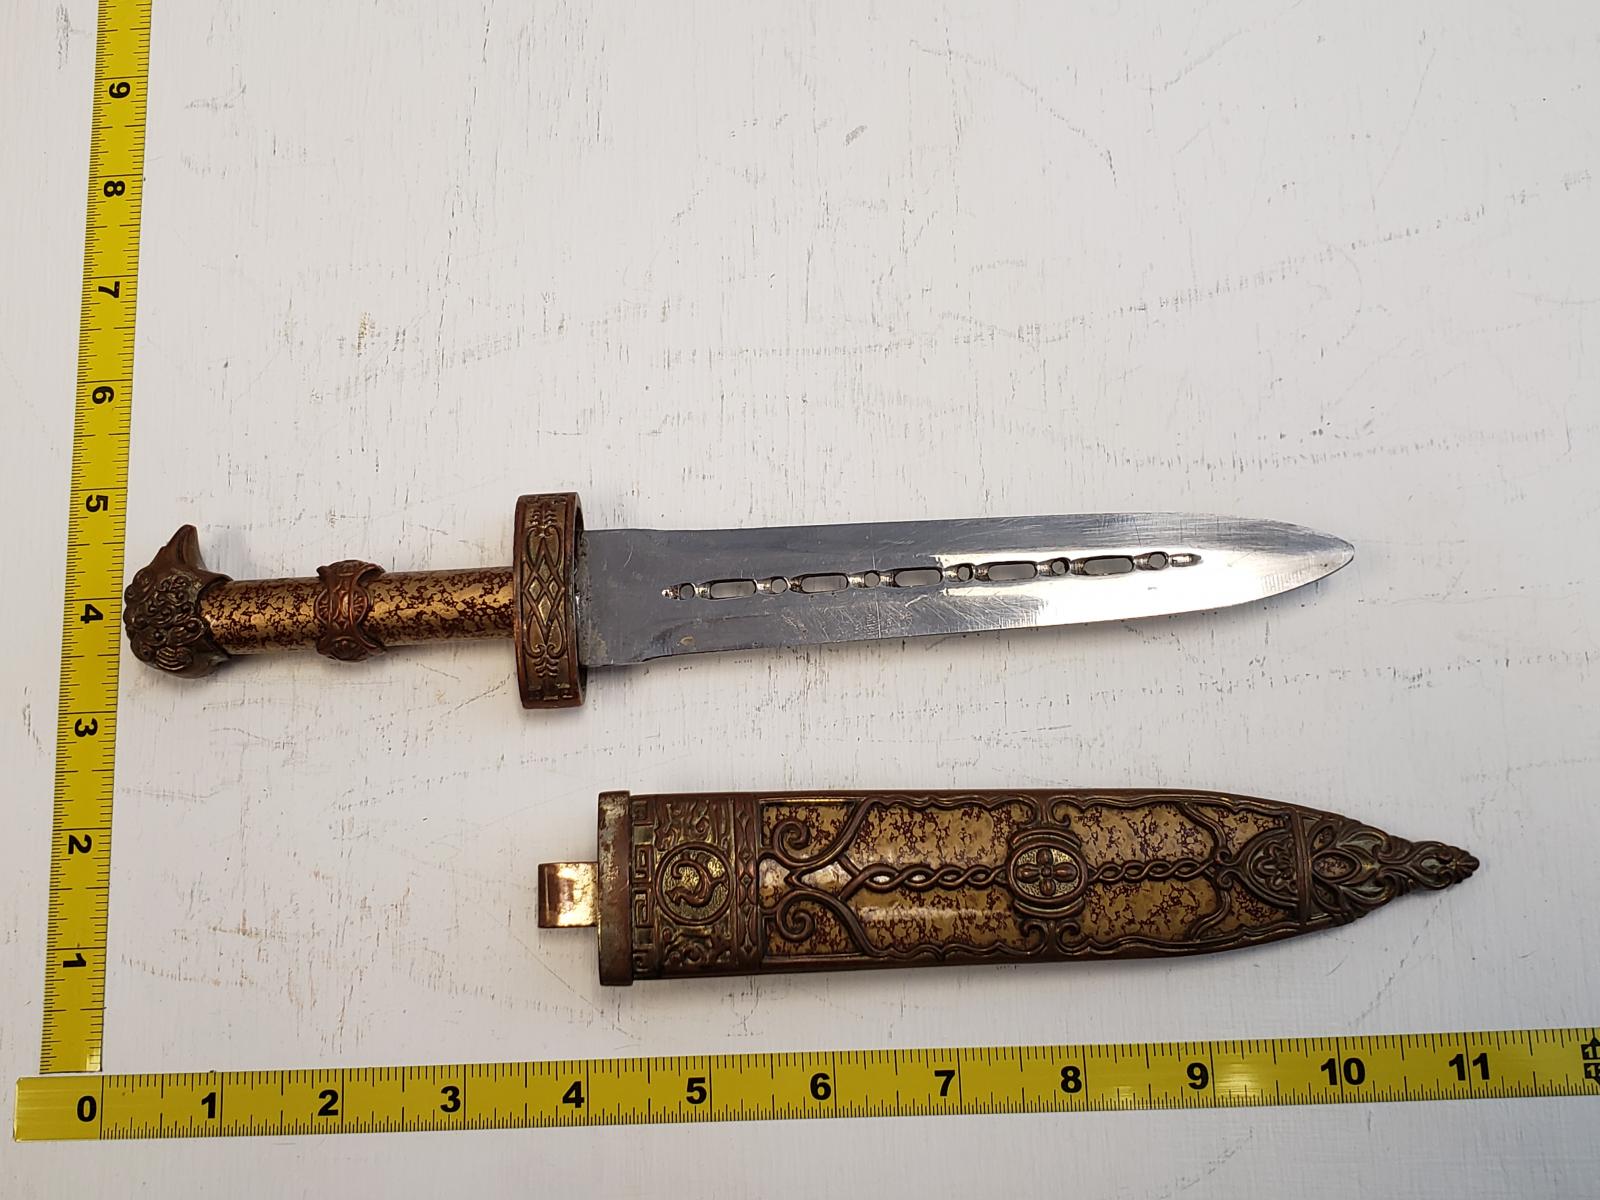 Small Brass dagger with decorative sheath - Not approved for blade to blade stage combat.